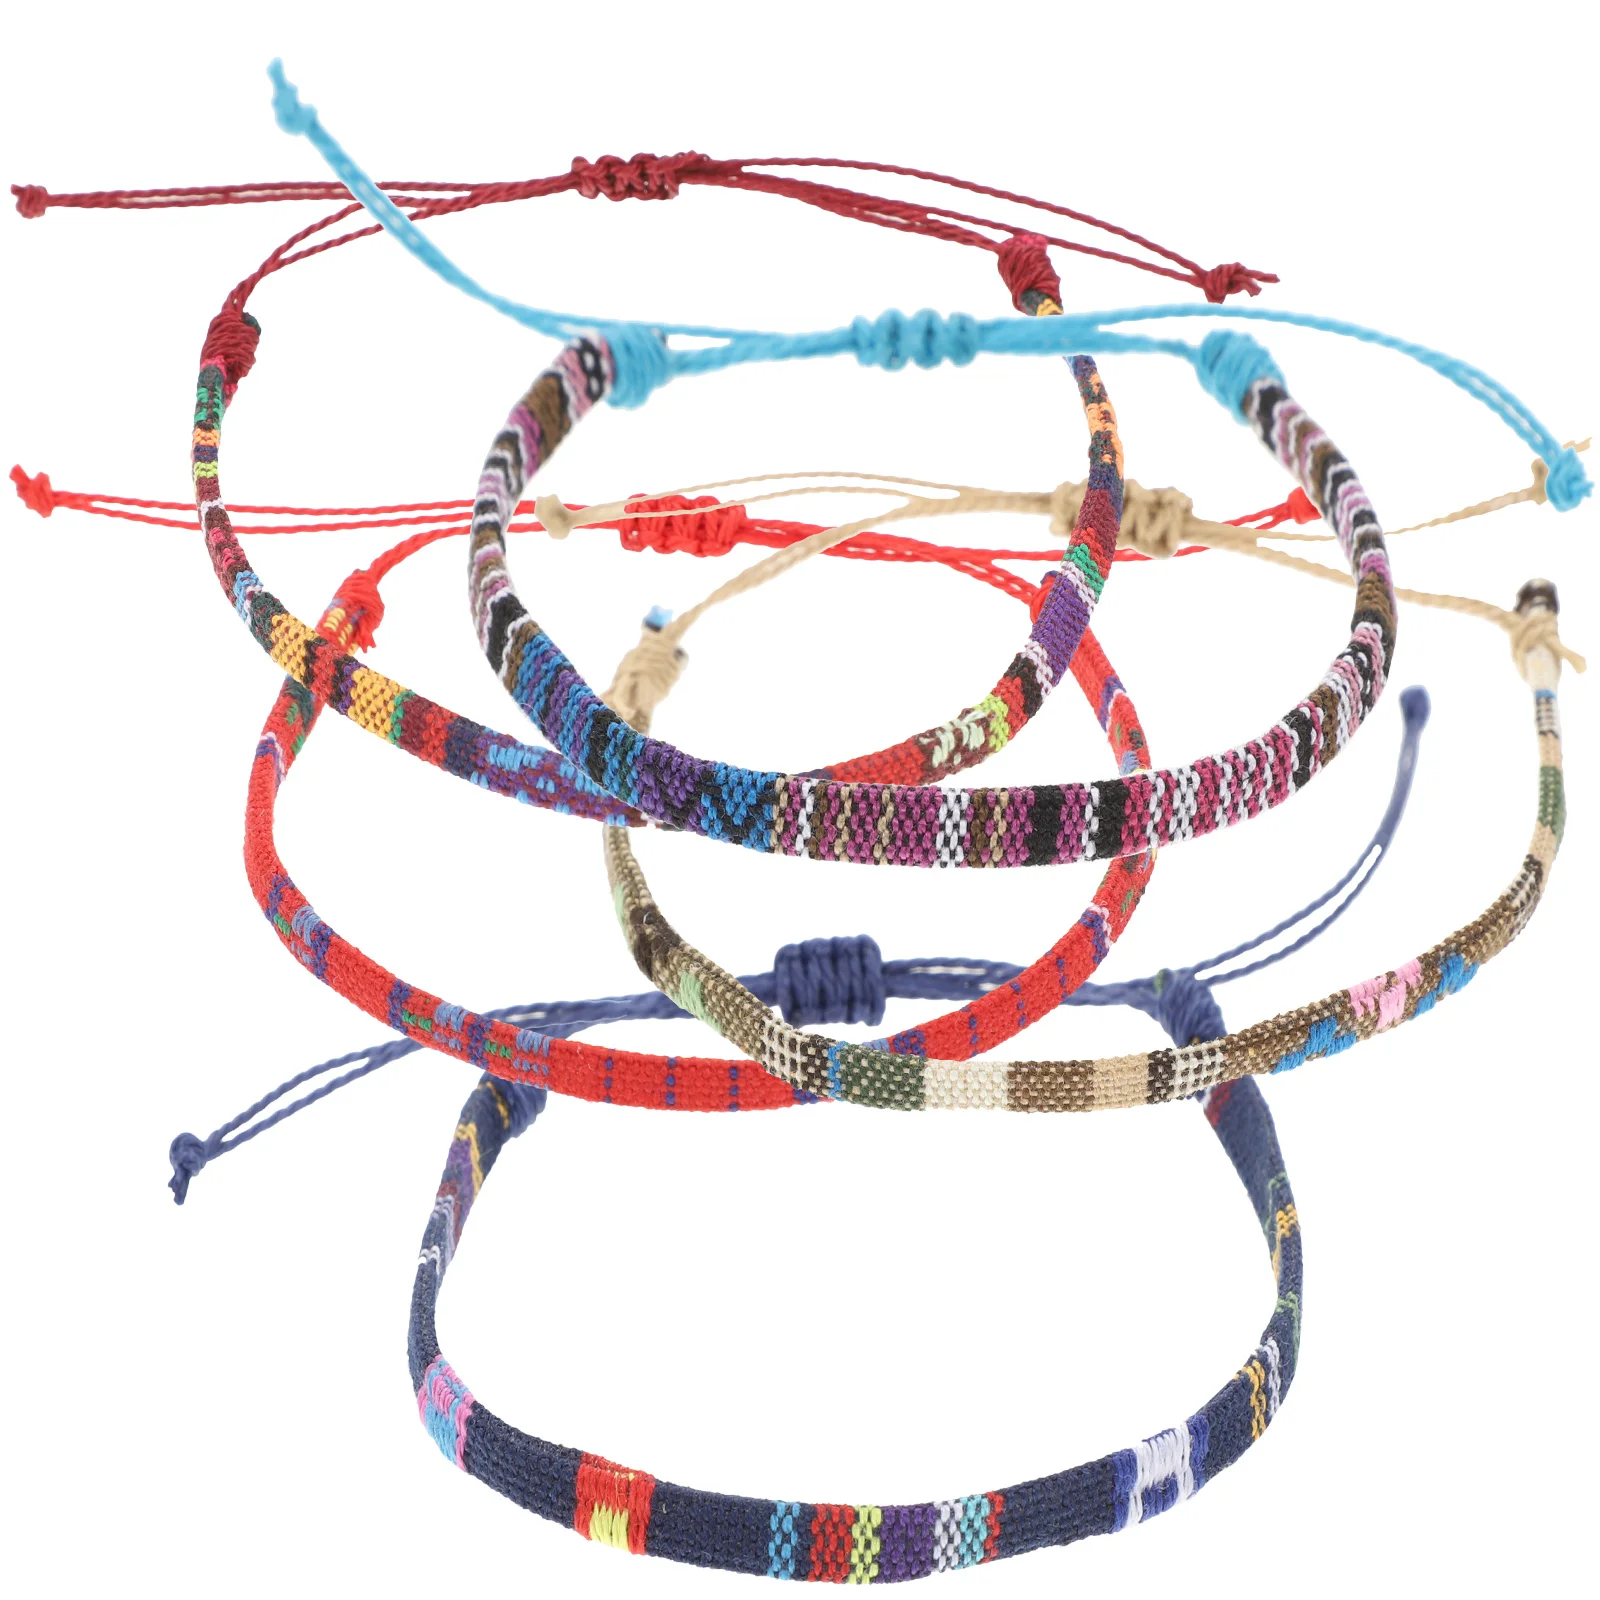 

5 Pcs Bangles Bracelets Women Woven Girl Anklet Matching Couples Girls Wrist Jewelry Wristband Colorful Rope